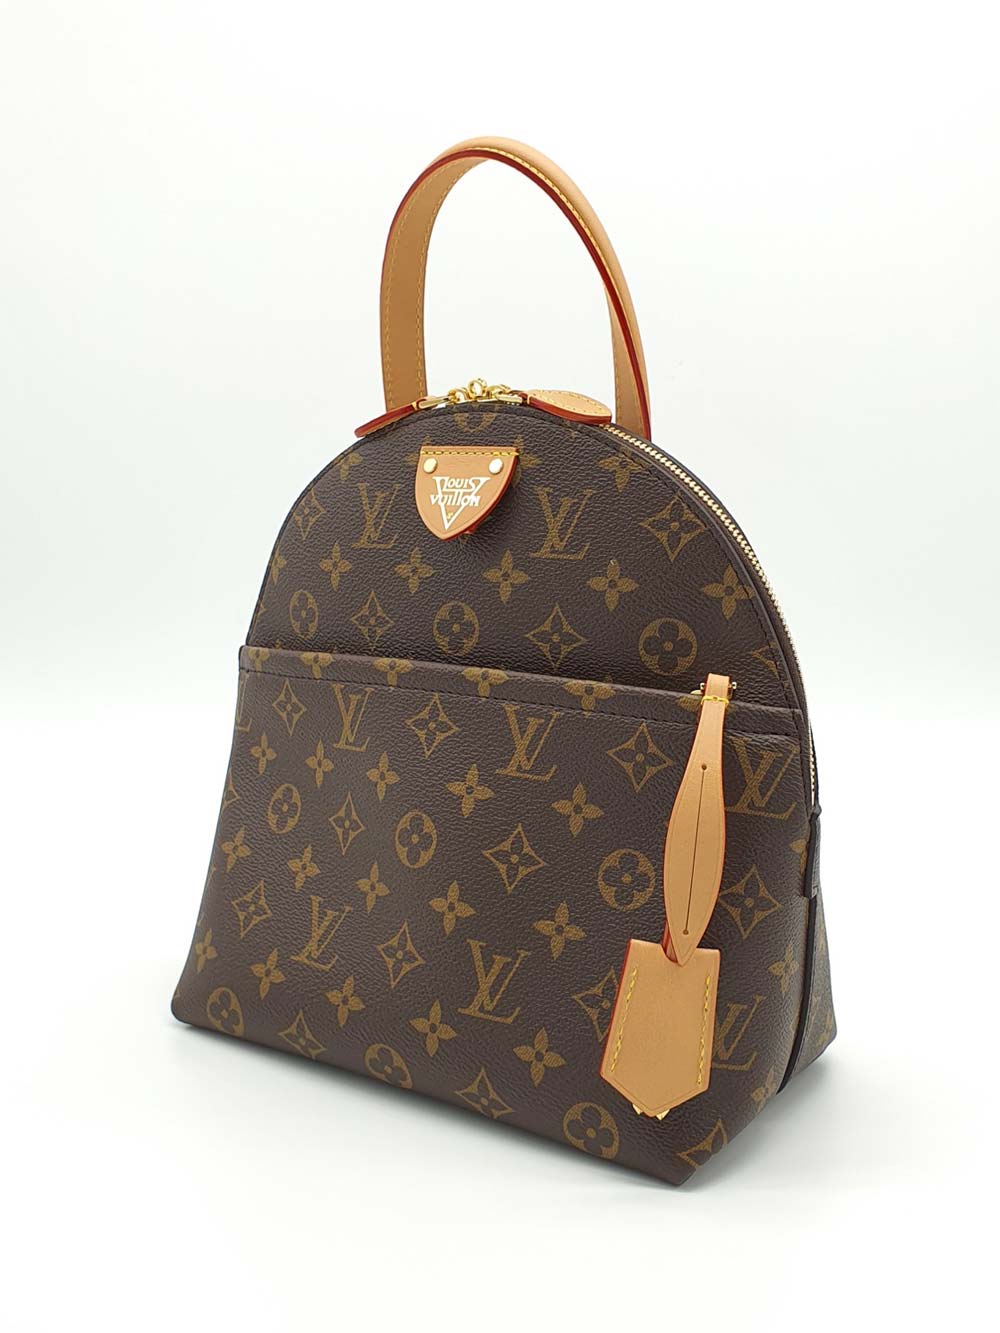 Products By Louis Vuitton: Lv Moon Backpack